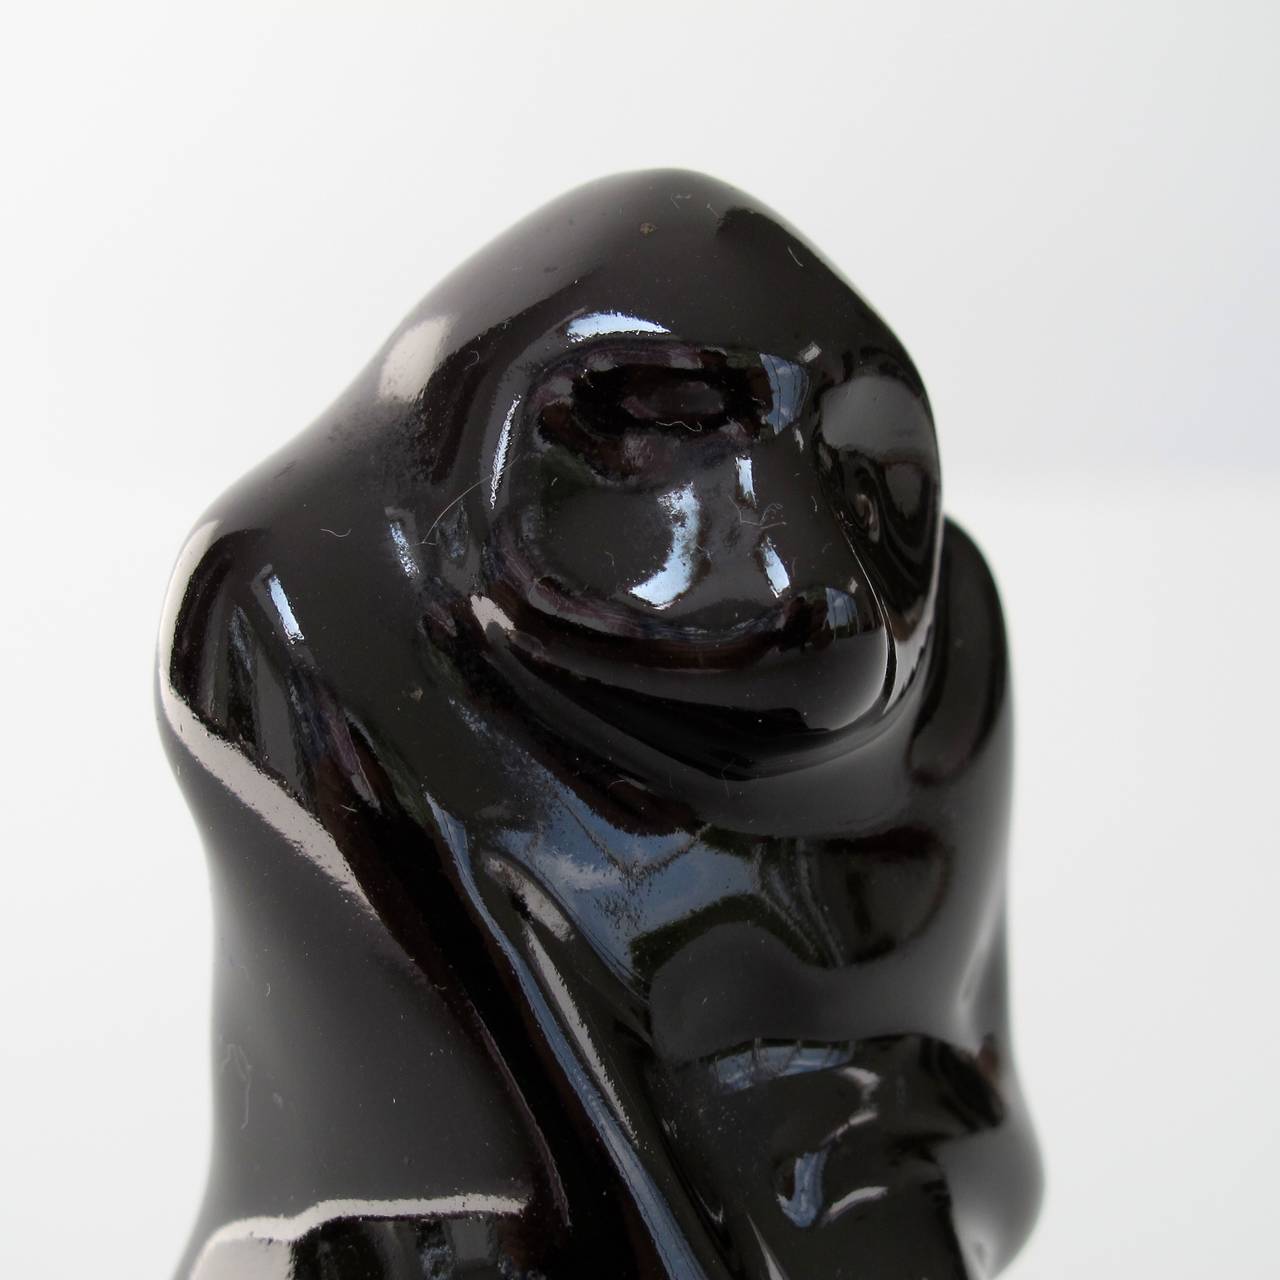 Early 20th Century Rare Earthenware Sculpture of a Seated Monkey by Hildo Krop for ESKAF, Art Deco